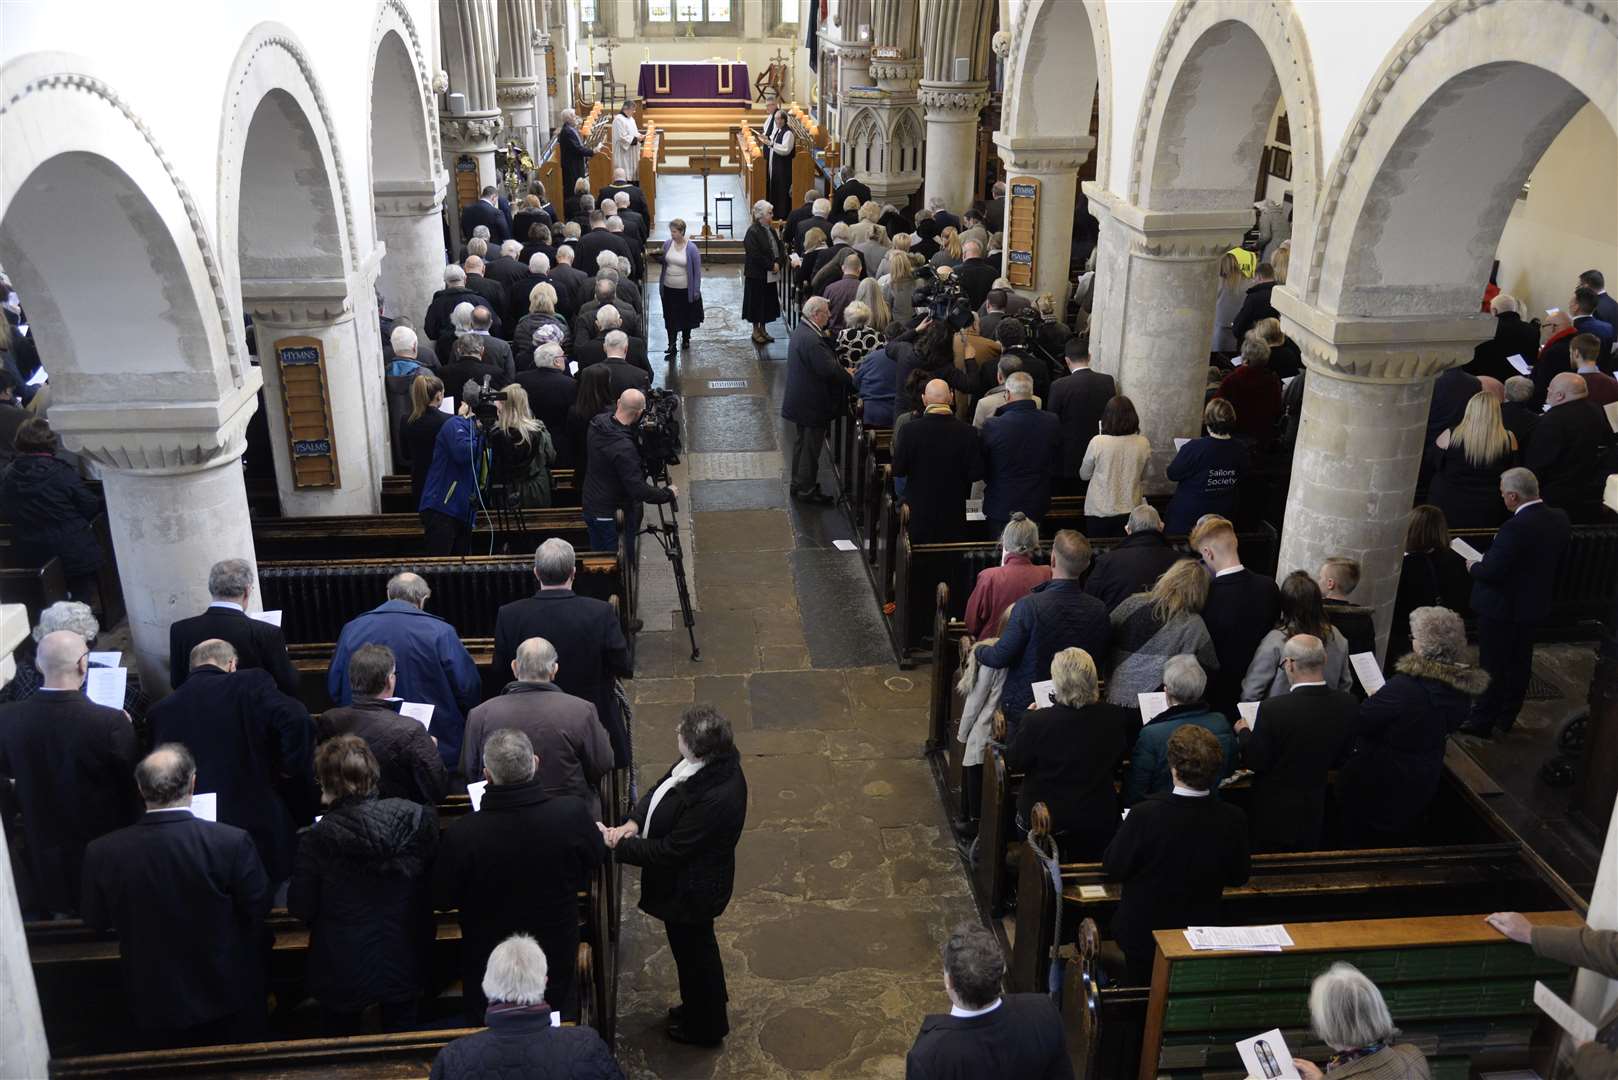 The scene at the memorial service for the 30th anniversary of the Herald of Free Enterprise tragedy at St Mary's Church, Dover in 2017